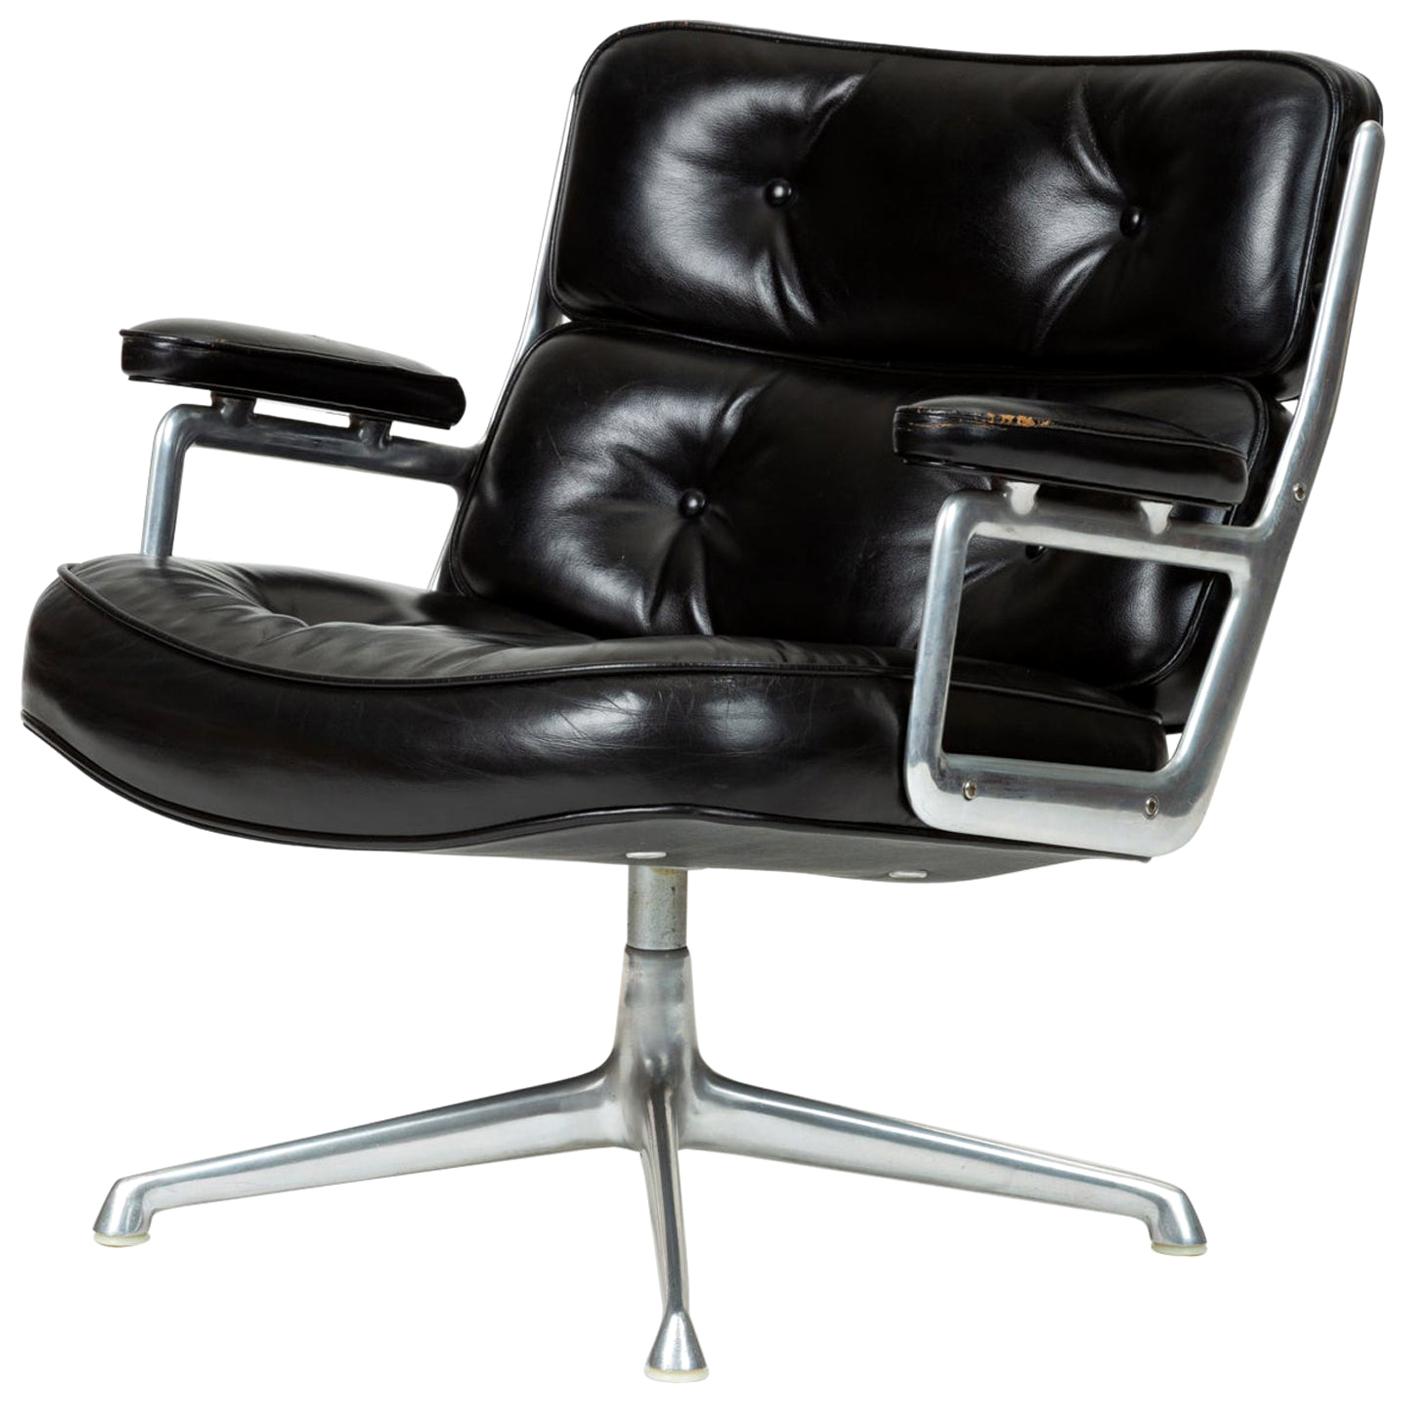 Eames Time Life Lobby Chair for Herman Miller